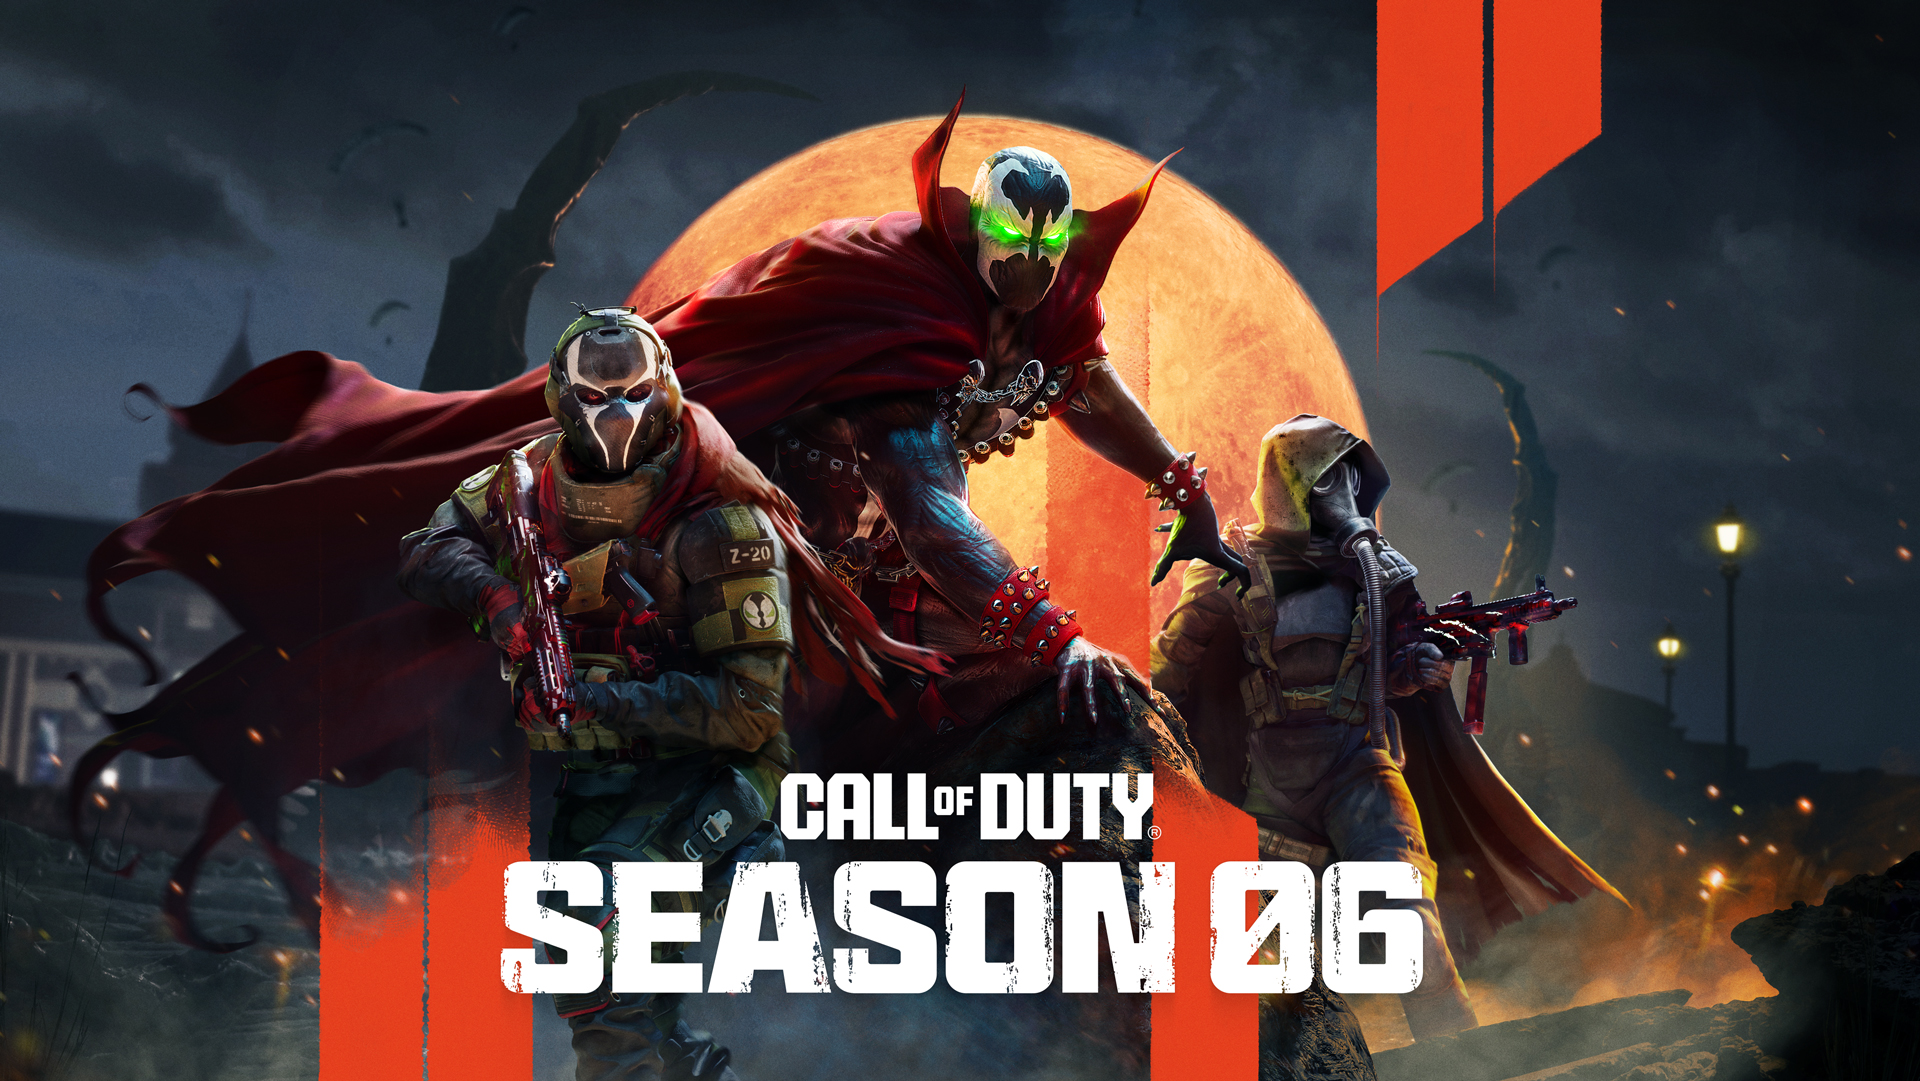 Call of Duty's mid-season event 'The Haunting' begins tomorrow